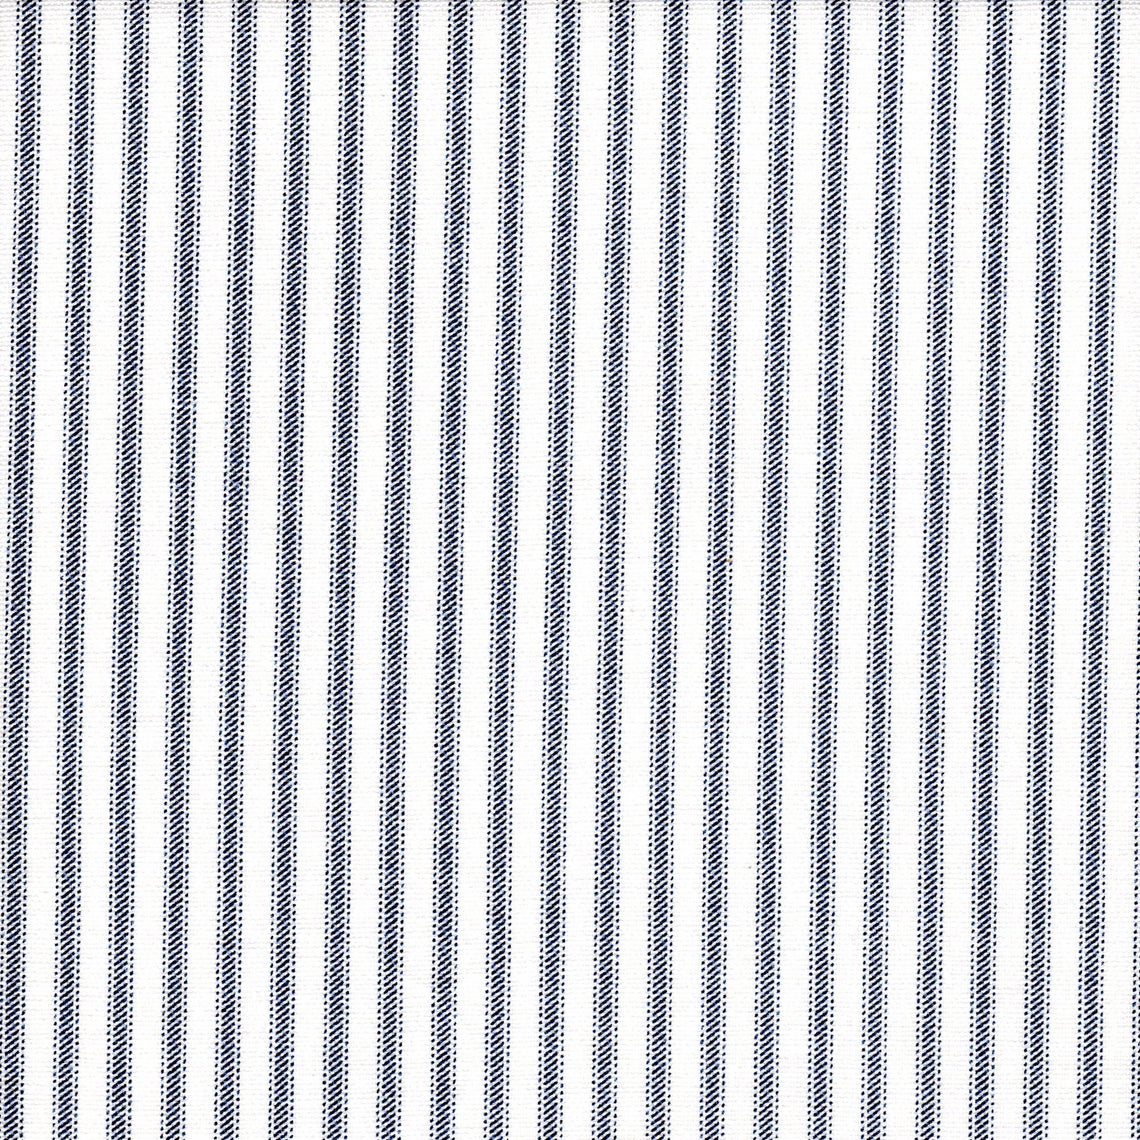 tailored tier cafe curtain panels pair in classic navy blue ticking stripe on white